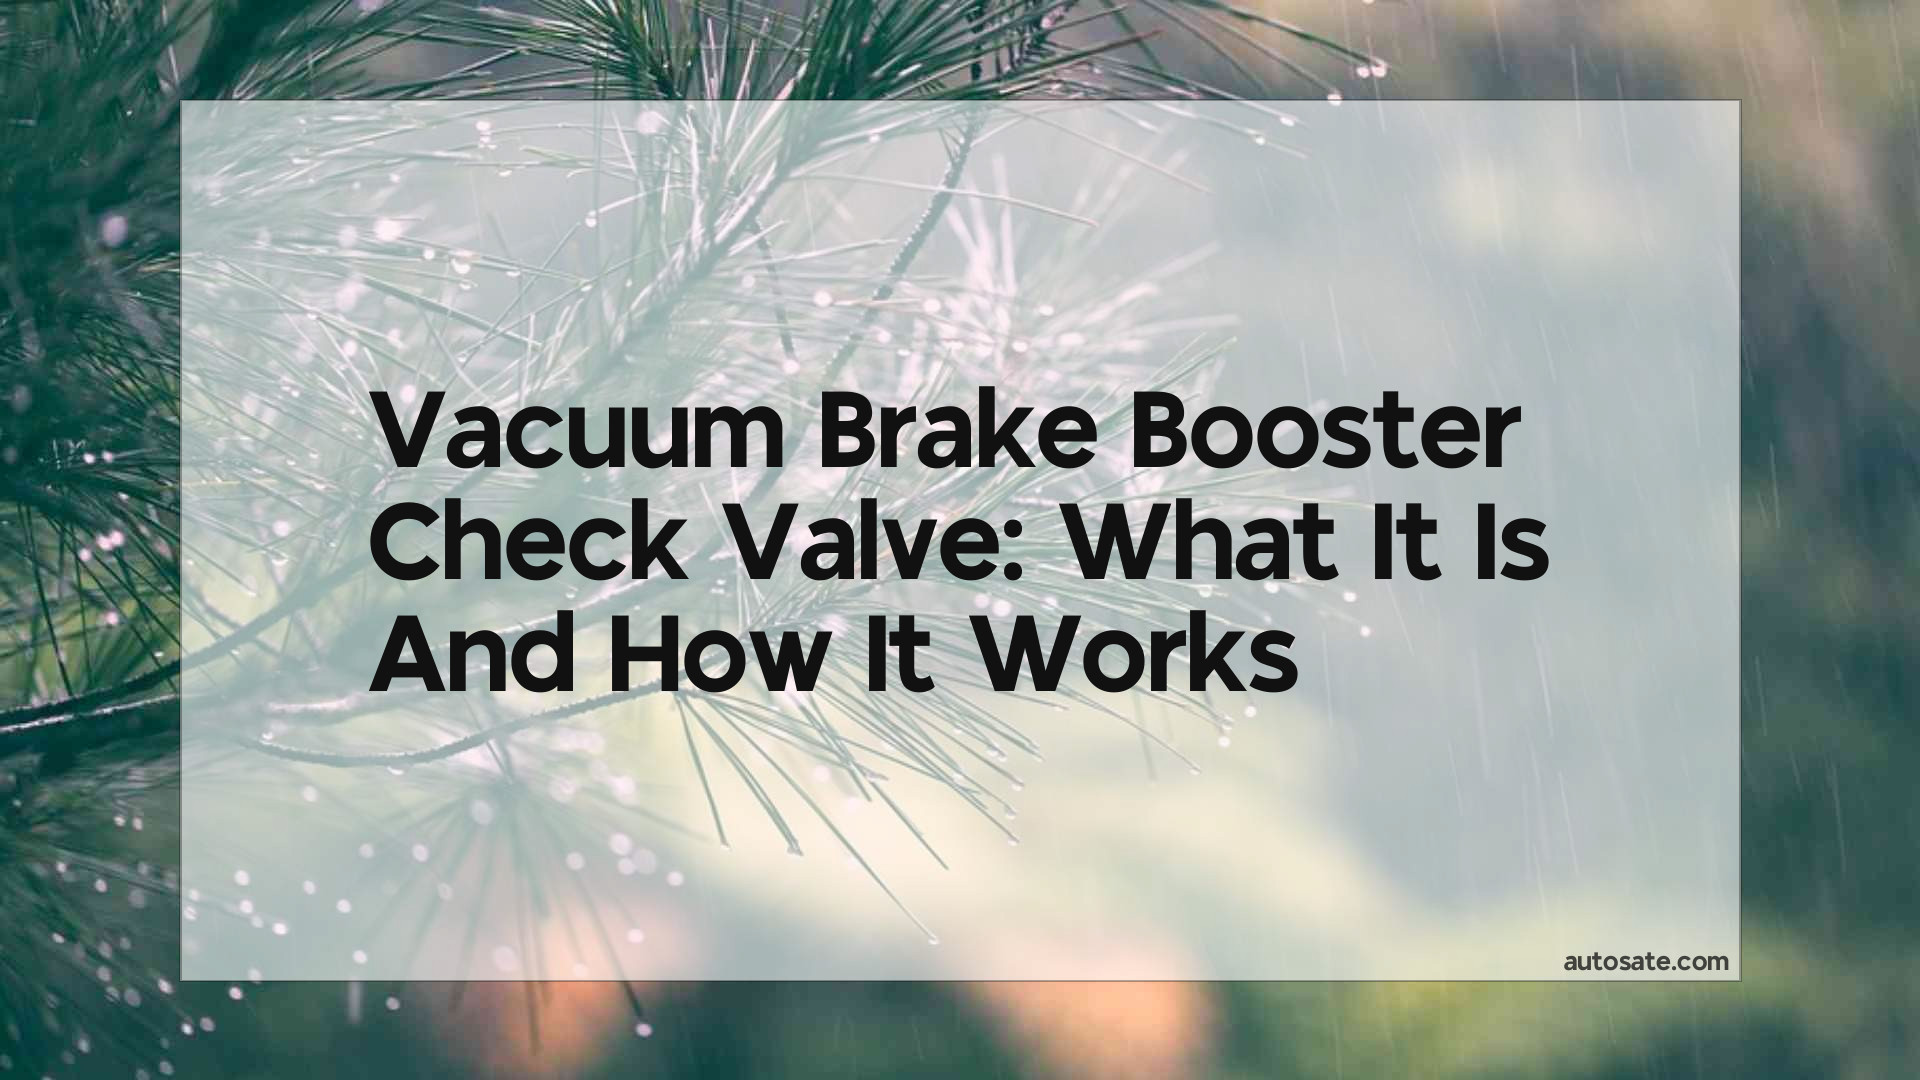 Vacuum Brake Booster Check Valve: What It Is And How It Works